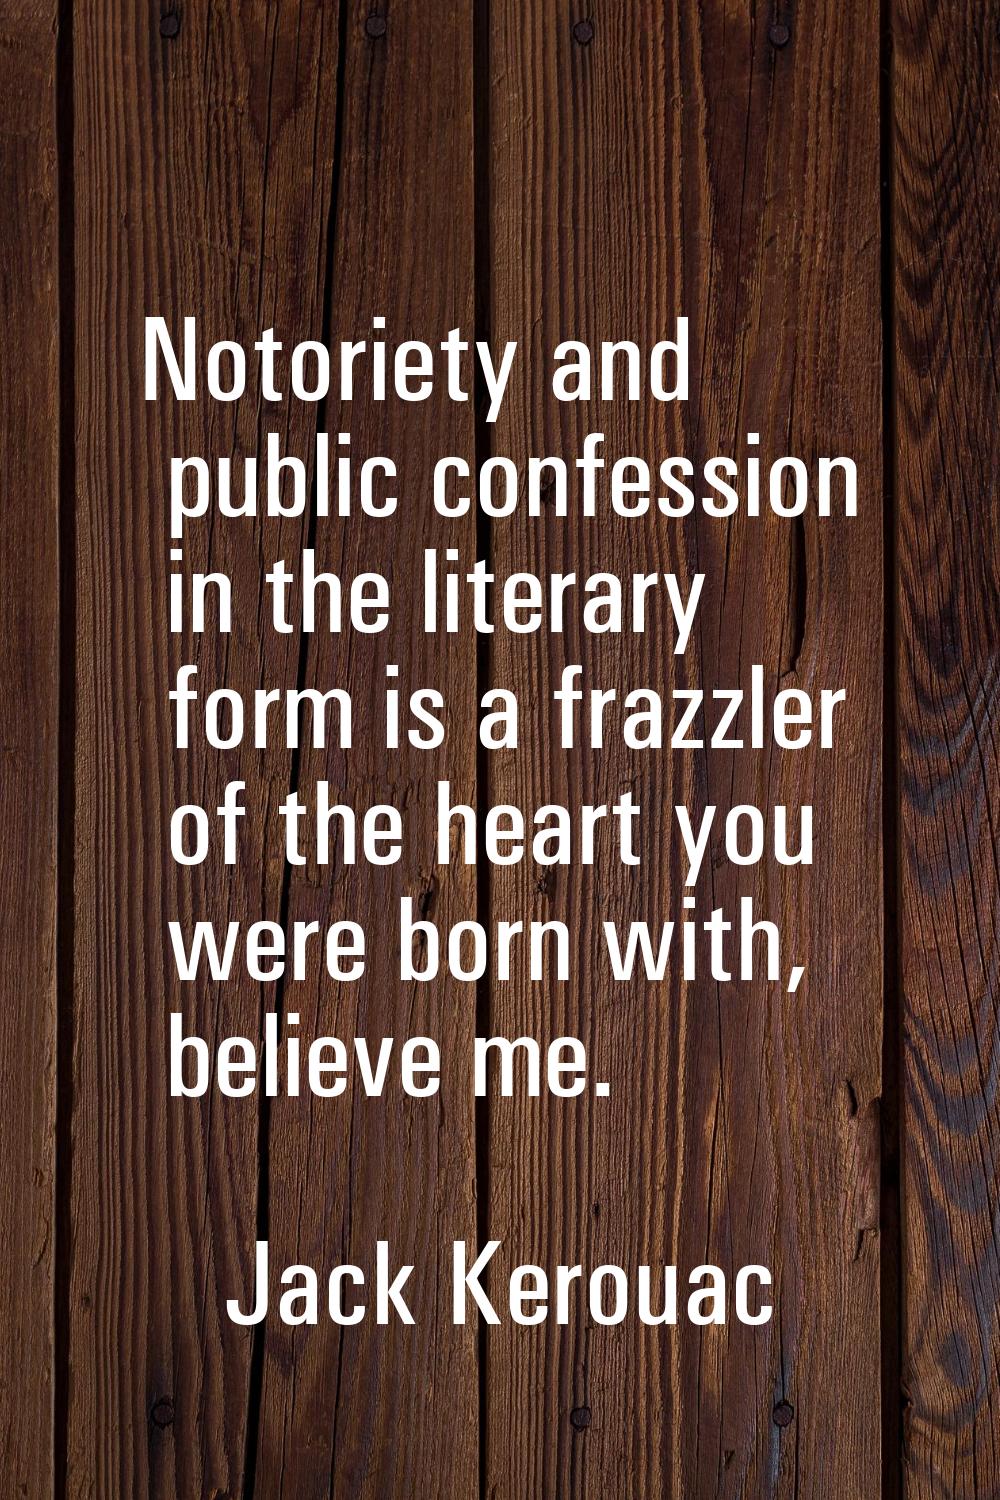 Notoriety and public confession in the literary form is a frazzler of the heart you were born with,